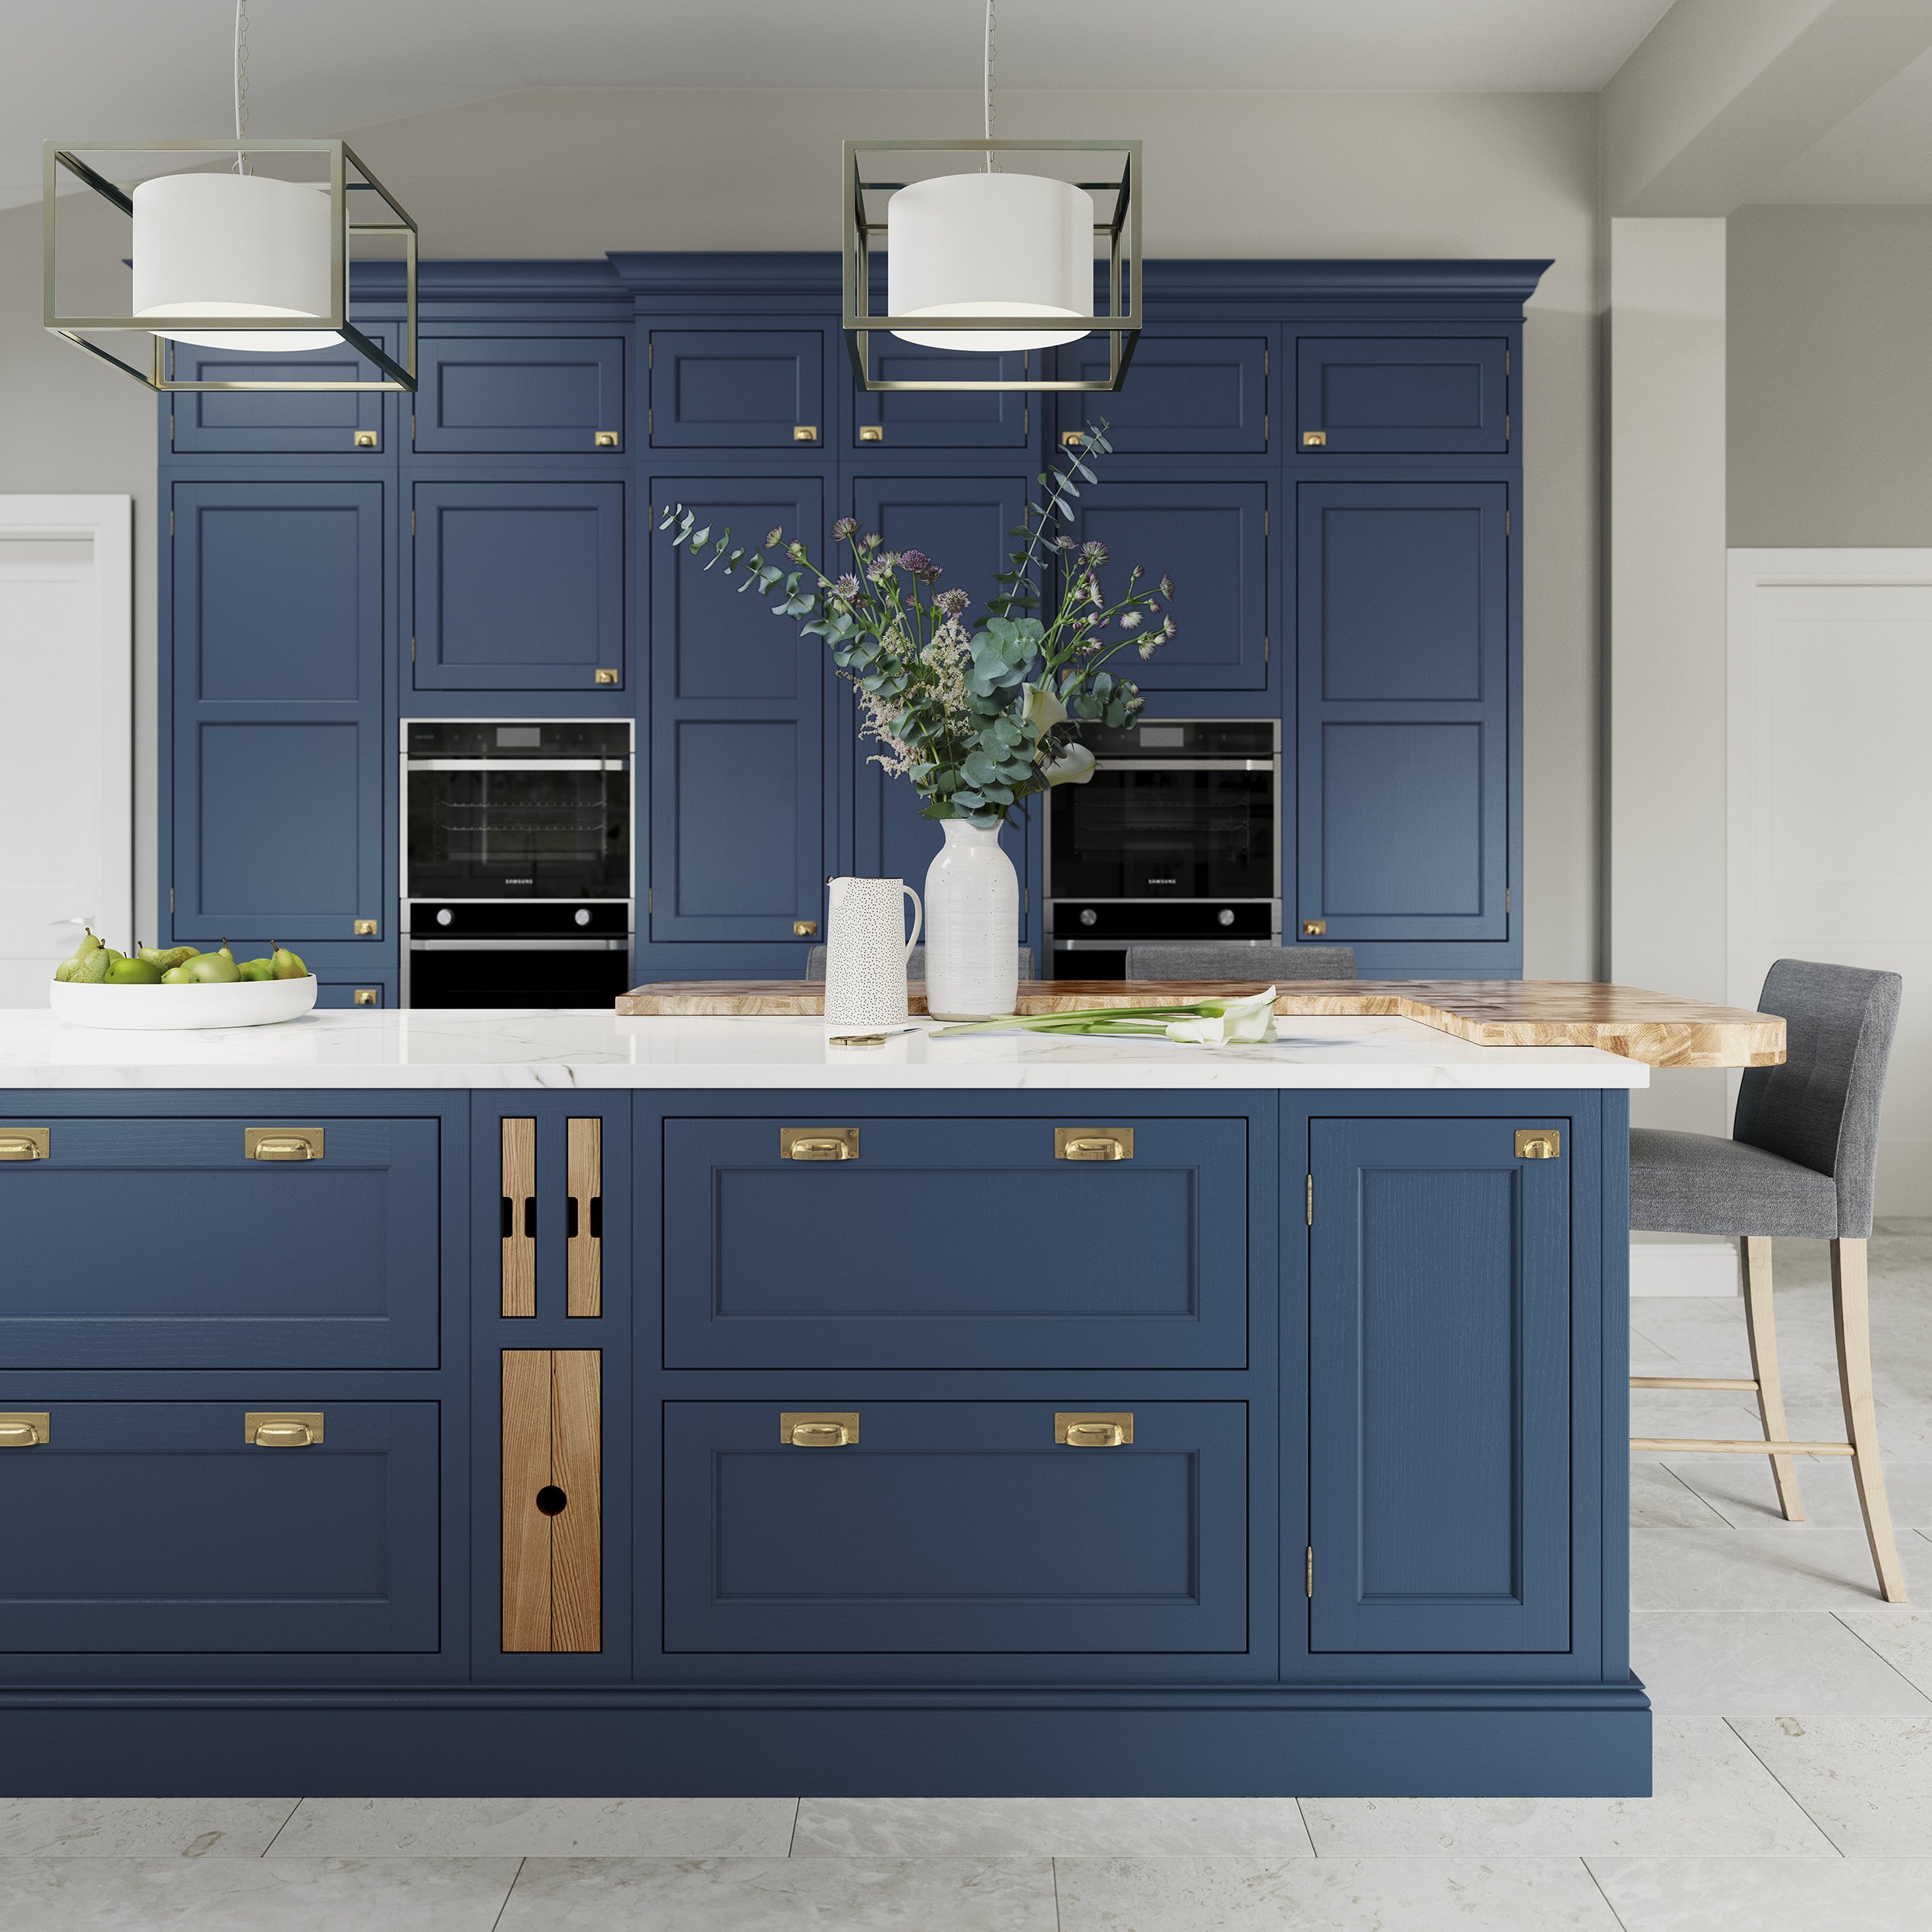 Northbrook Designs Kitchens Donegal